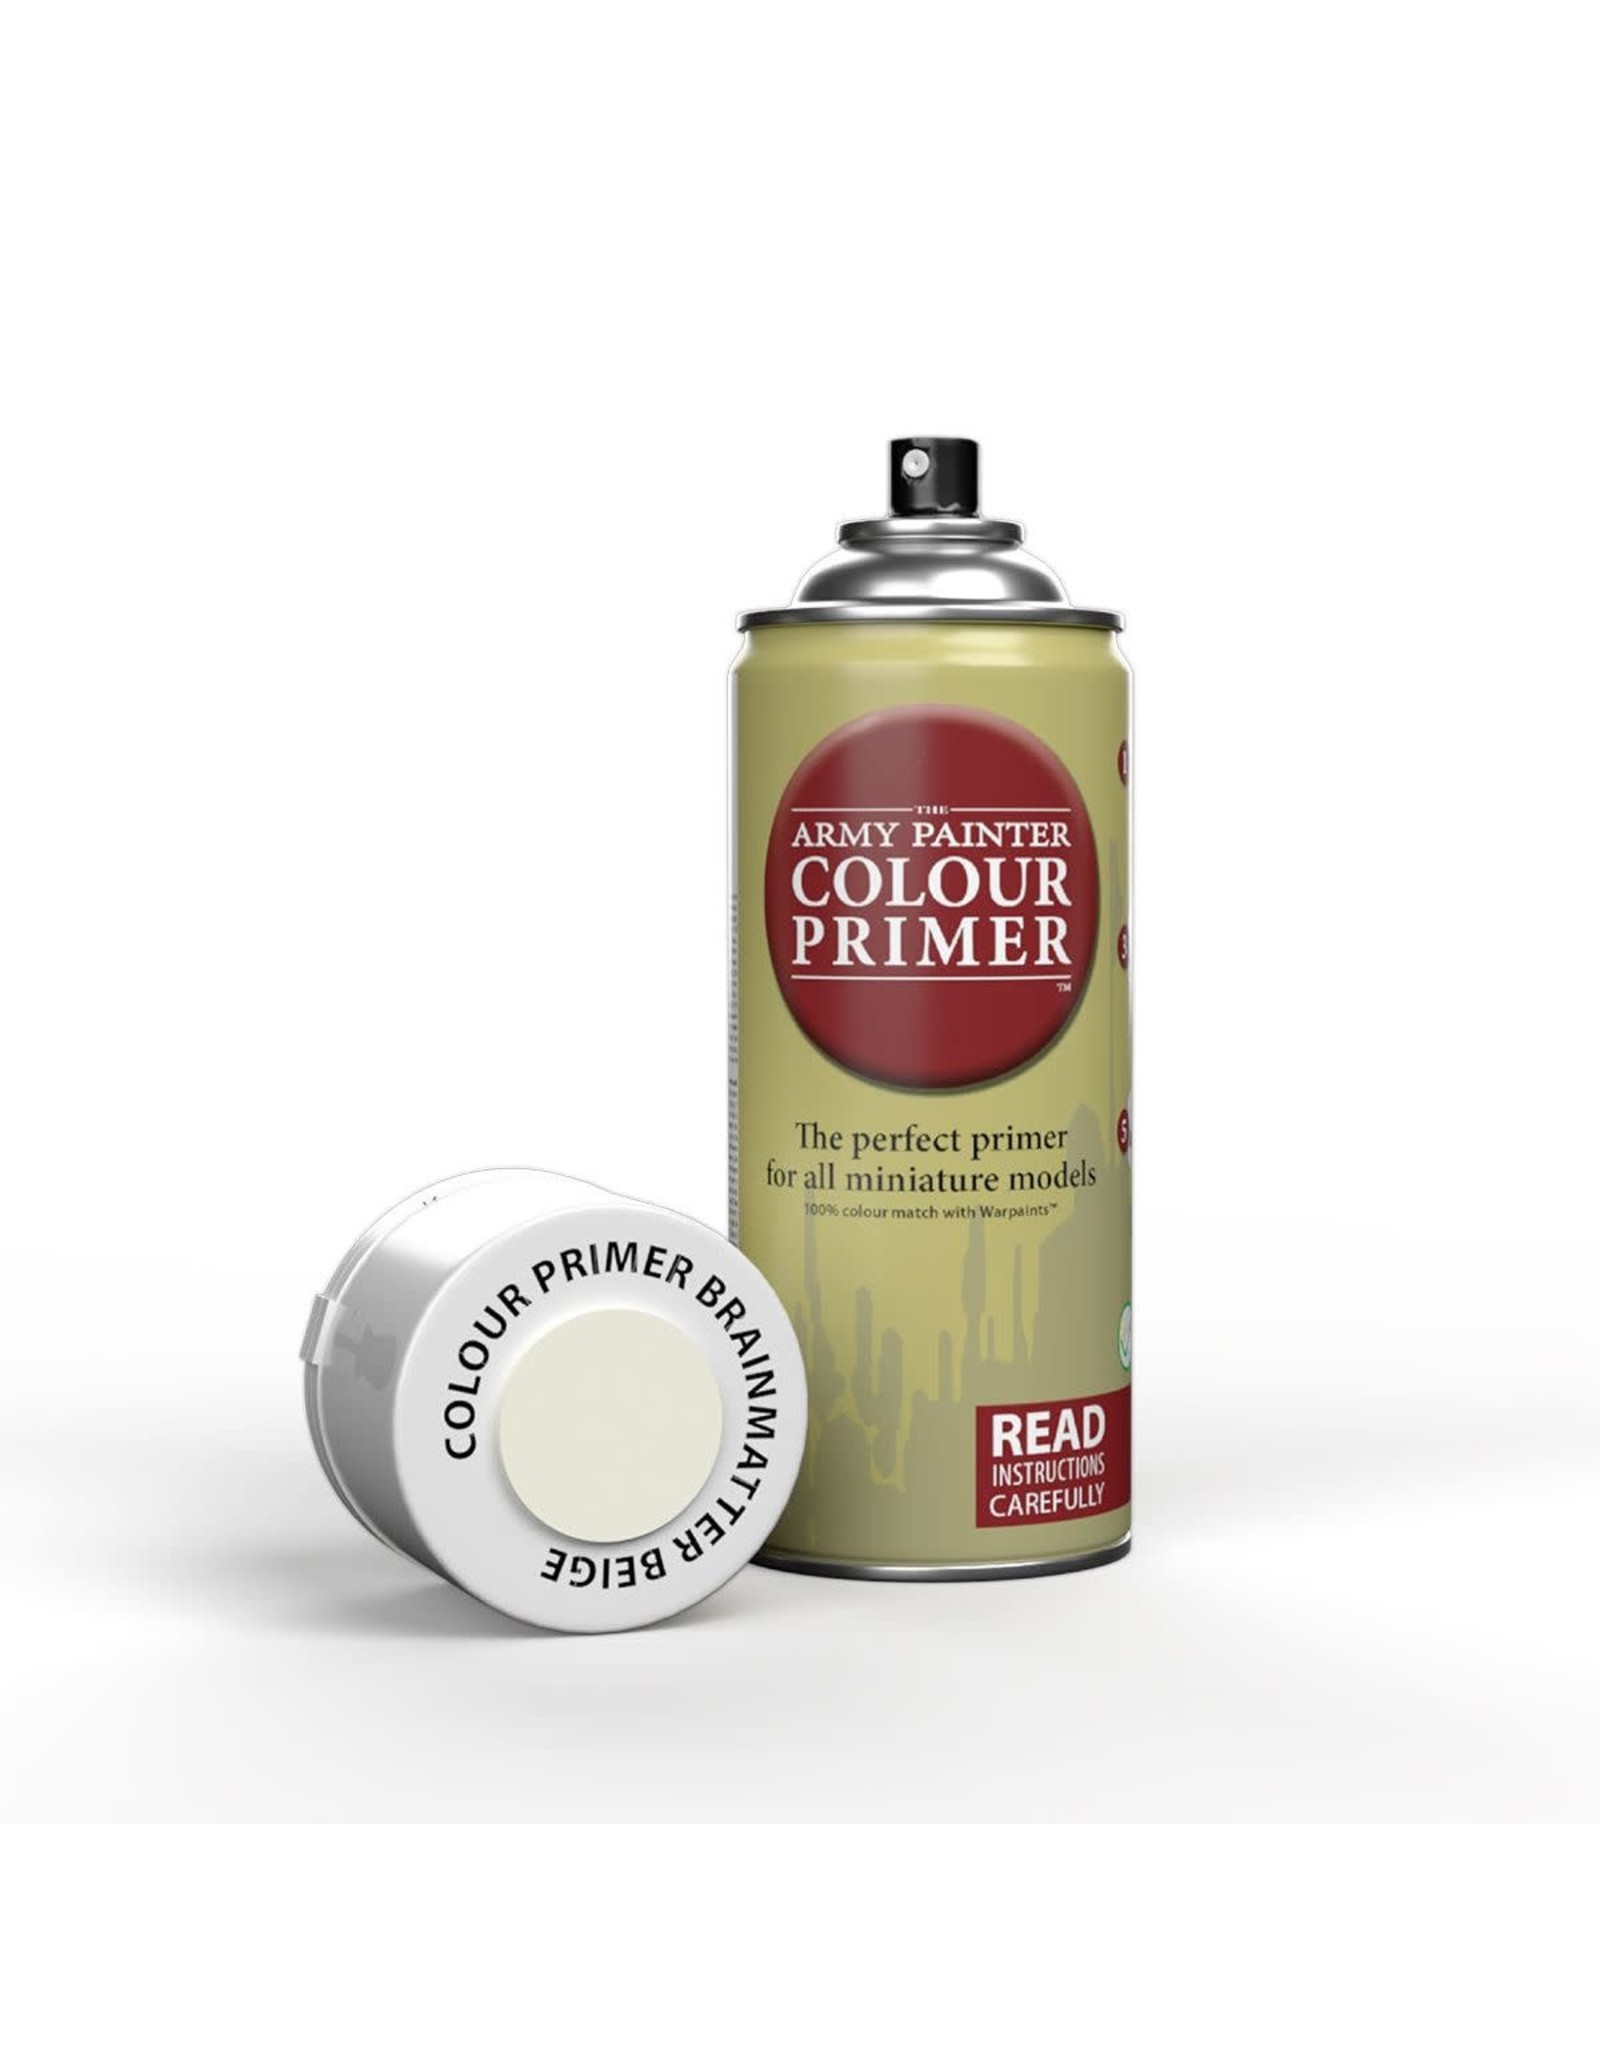 The Army Painter The Army Painter Colour Primer - Brainmatter Beige